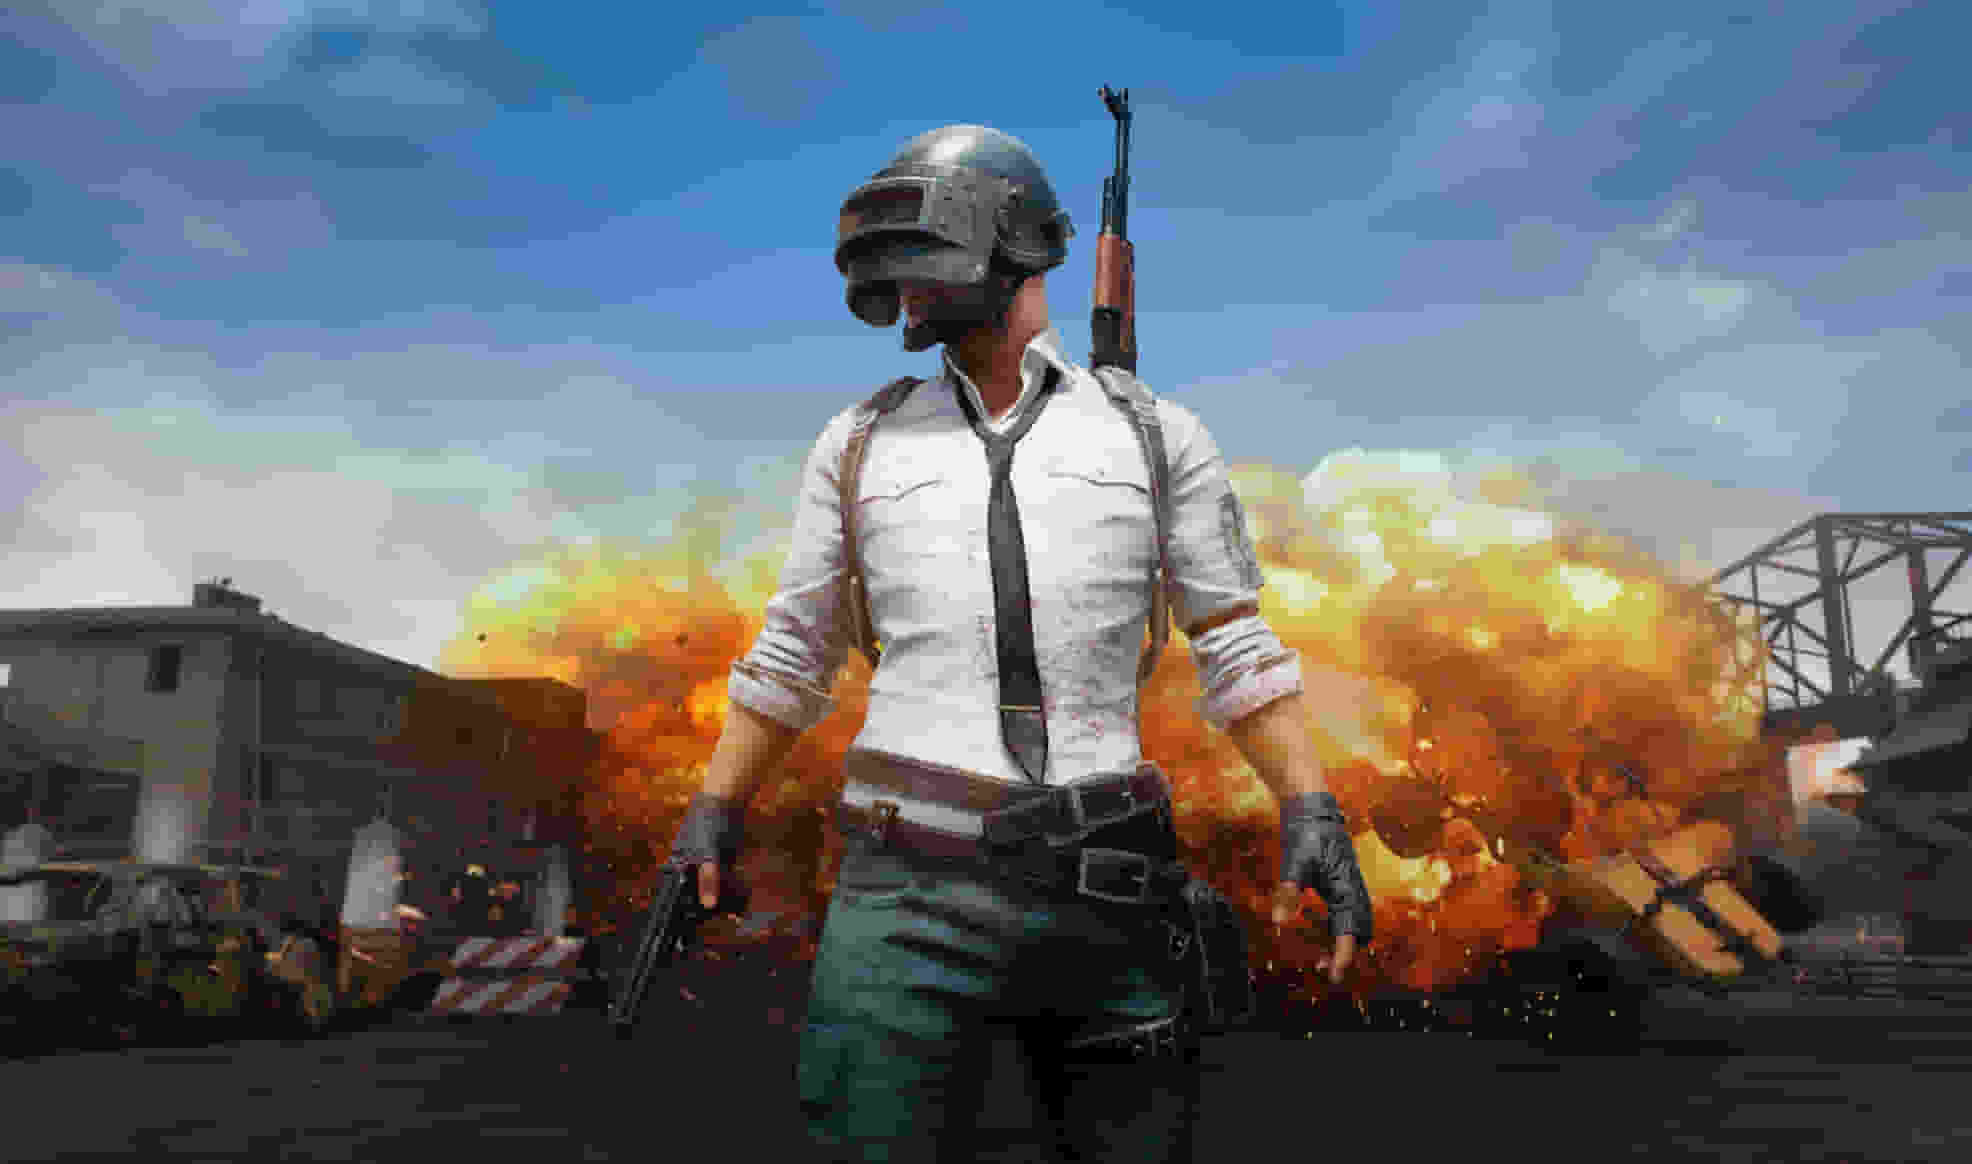 how to pre register for battlegrounds mobile india, how to pre register battlegrounds mobile india, pre register for battlegrounds mobile india, how to pre register for pubg mobile india, pre register pubg mobile india, how to pre register pubg mobile india